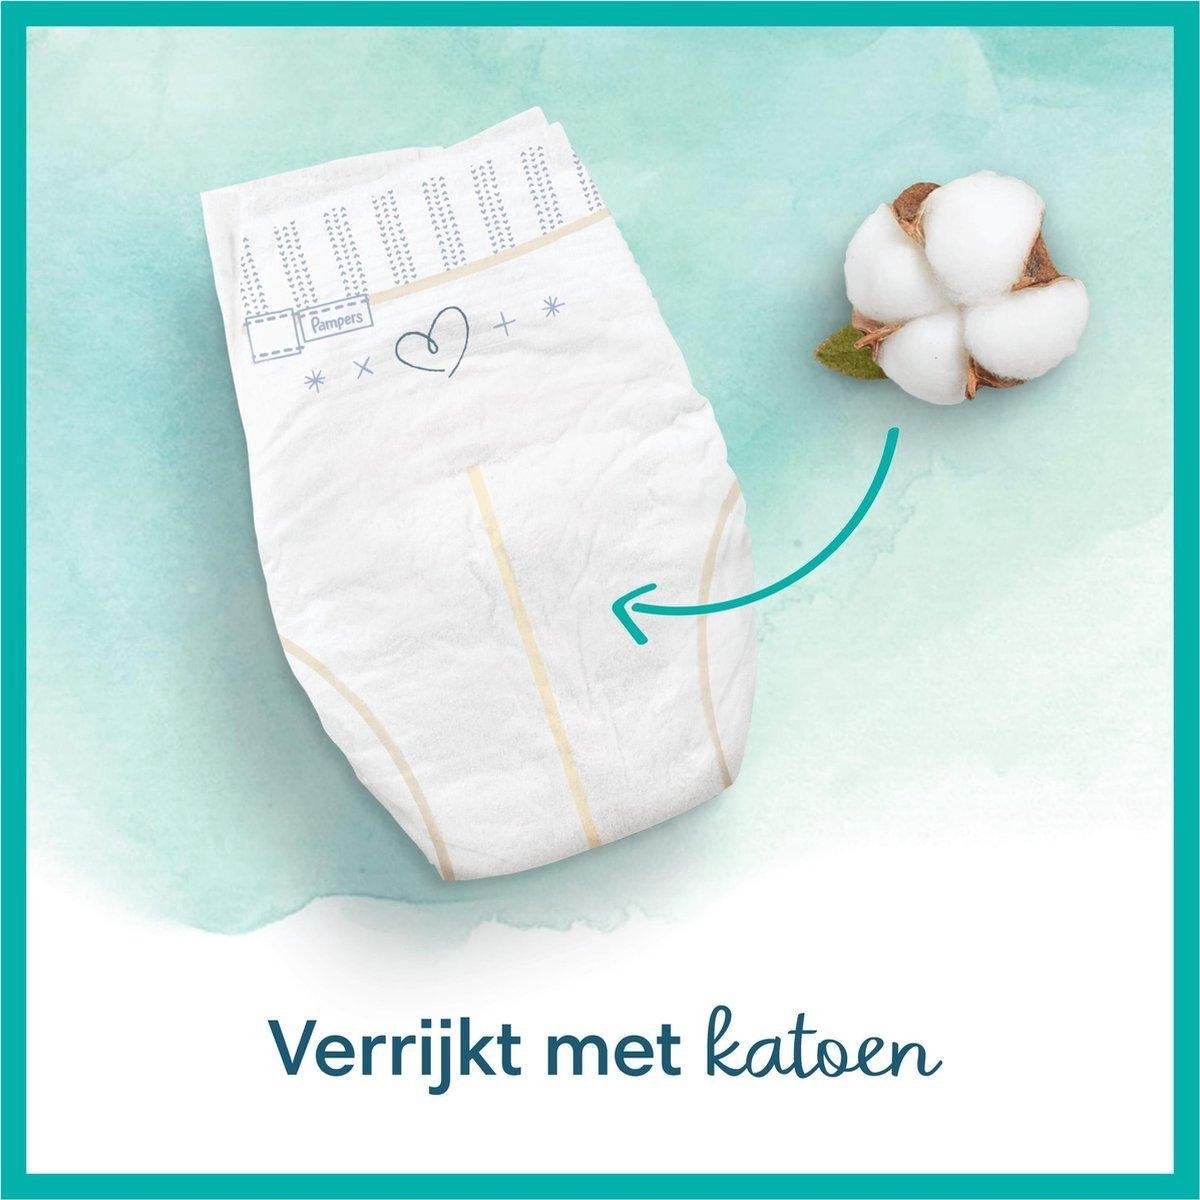 Pampers Harmonie Taille 3 (6 à 10 kg) - Emballage avec 22 Pampers